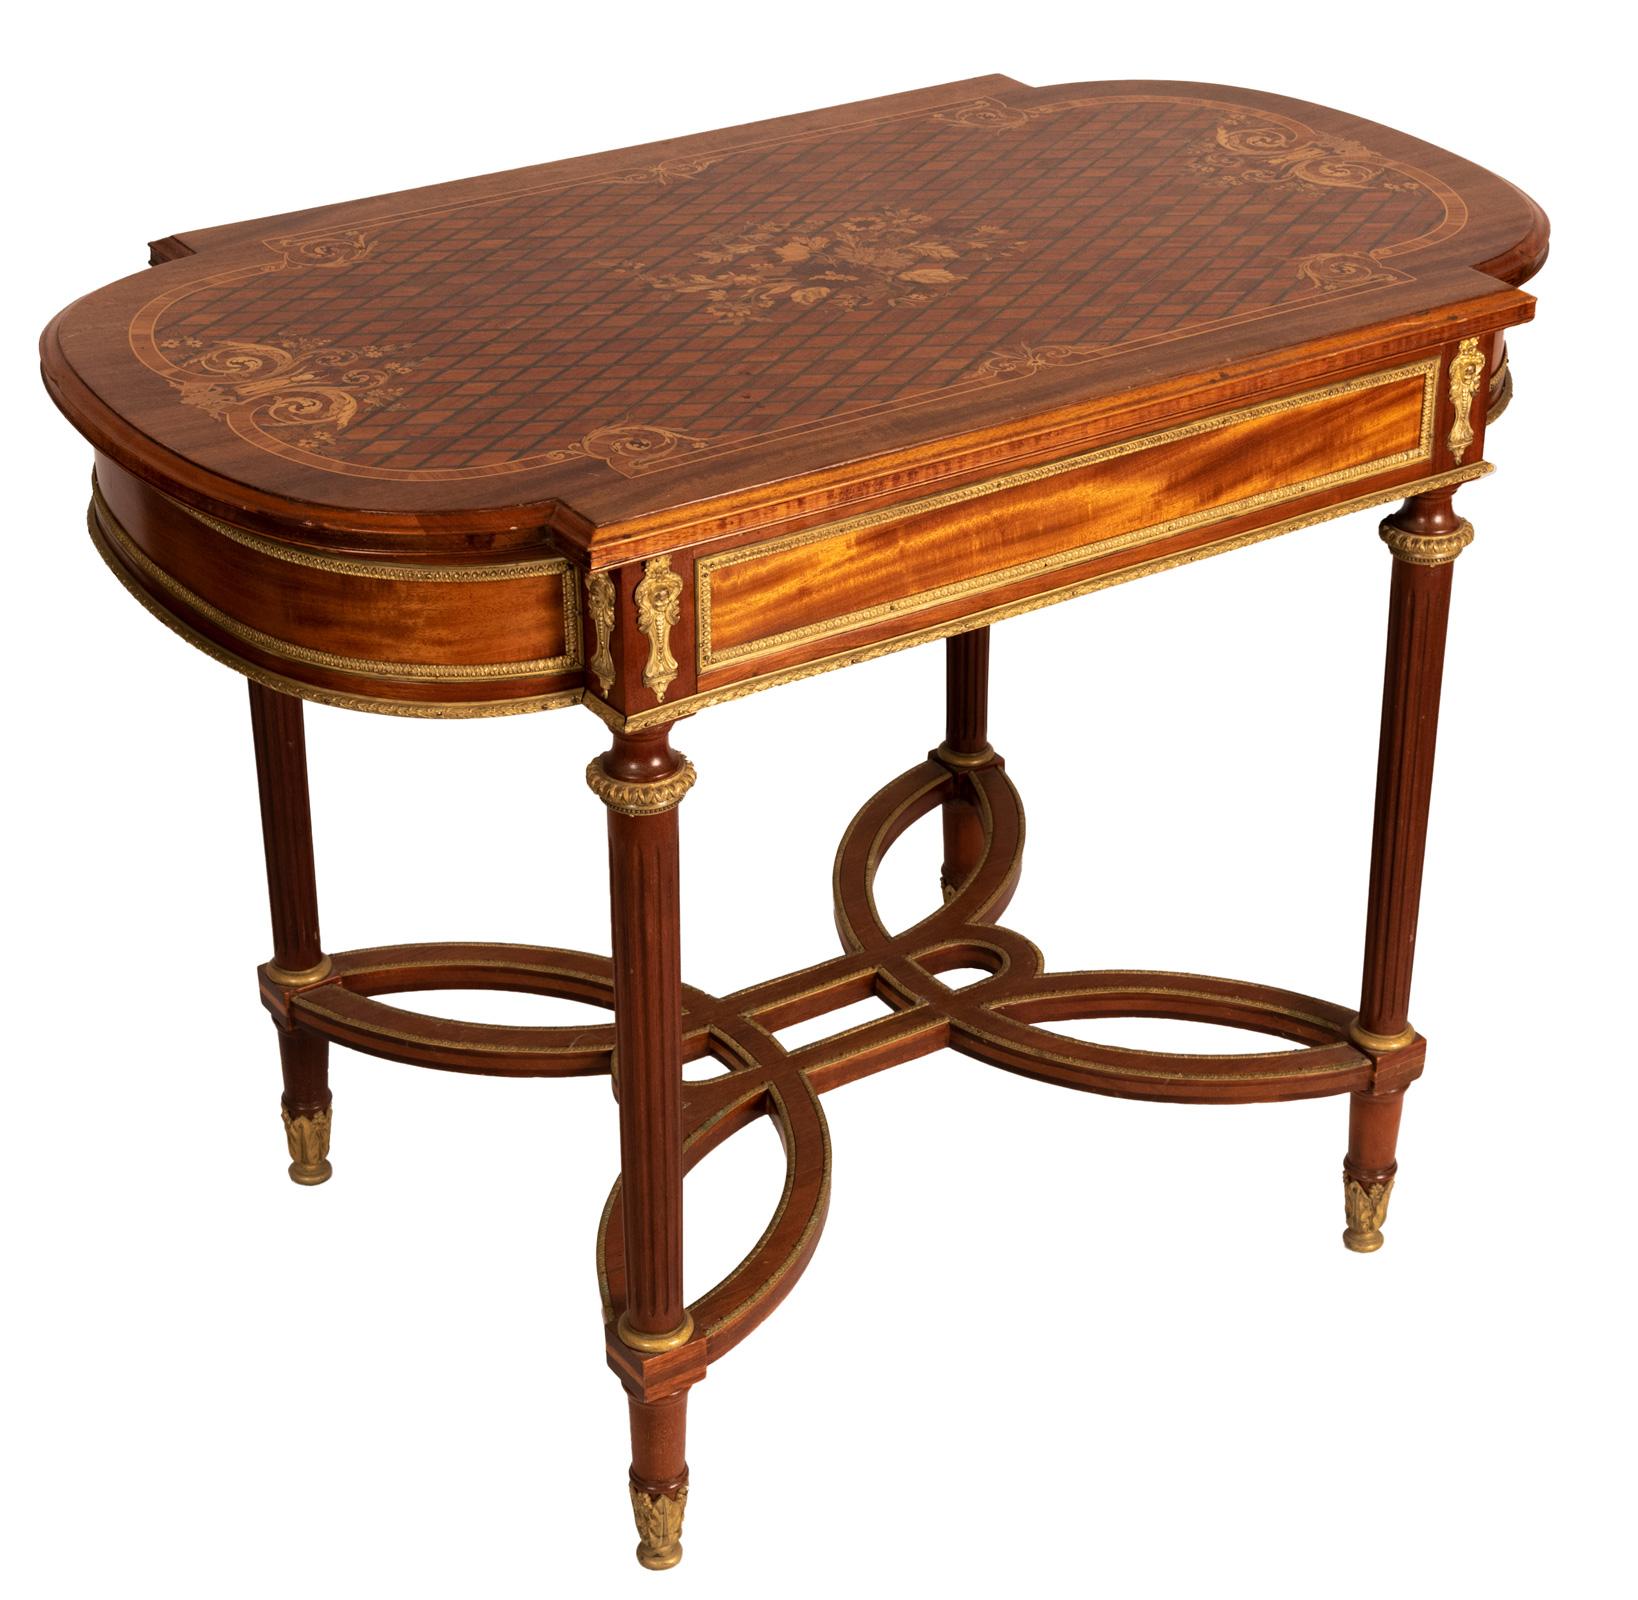 A Louis XVI style marquetry table with the top decorated with intricate floral sprays made of exotic woods, the table mounted with ormolu and fluted columnar legs connected with orbicular stretchers, (circa 1880).